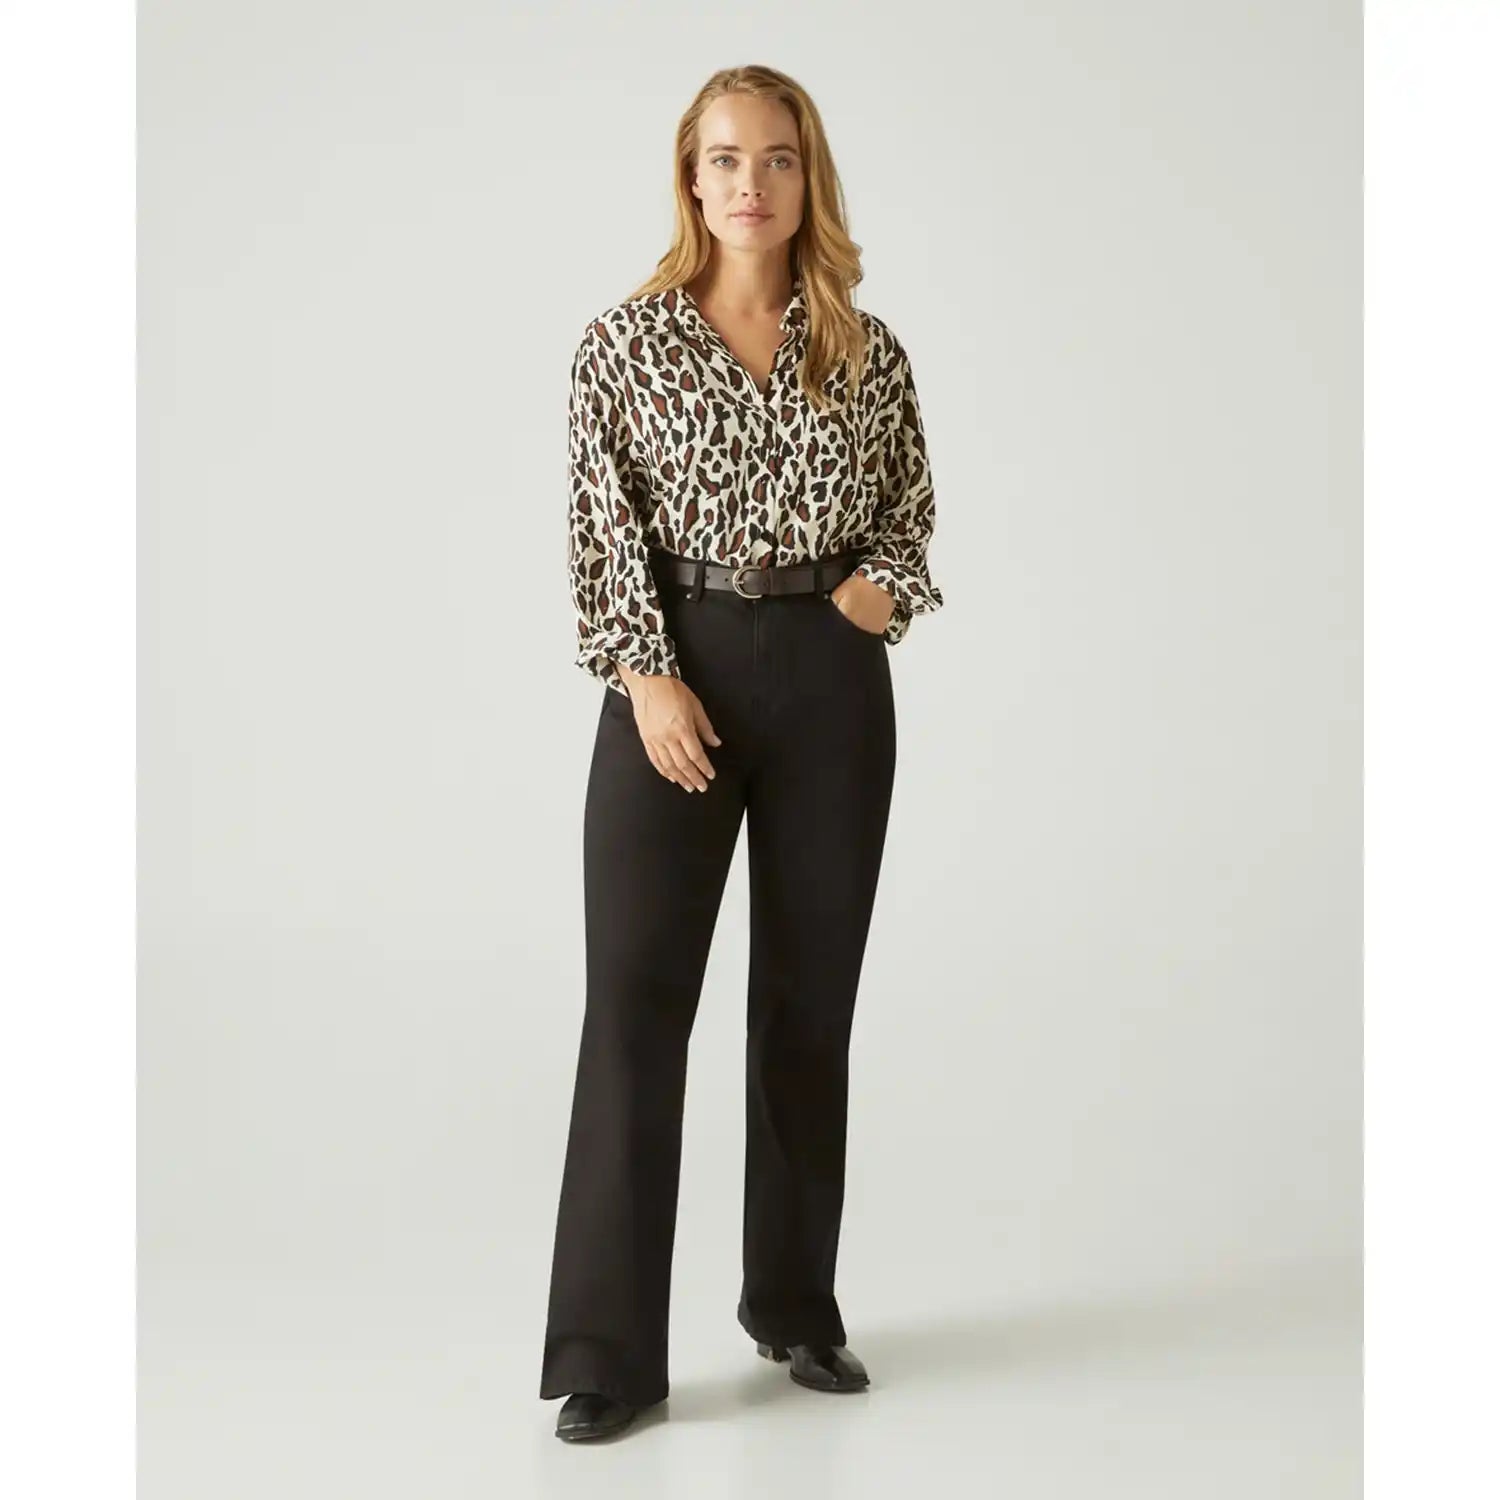 Couchel Animal Print Blouse - Raw 2 Shaws Department Stores